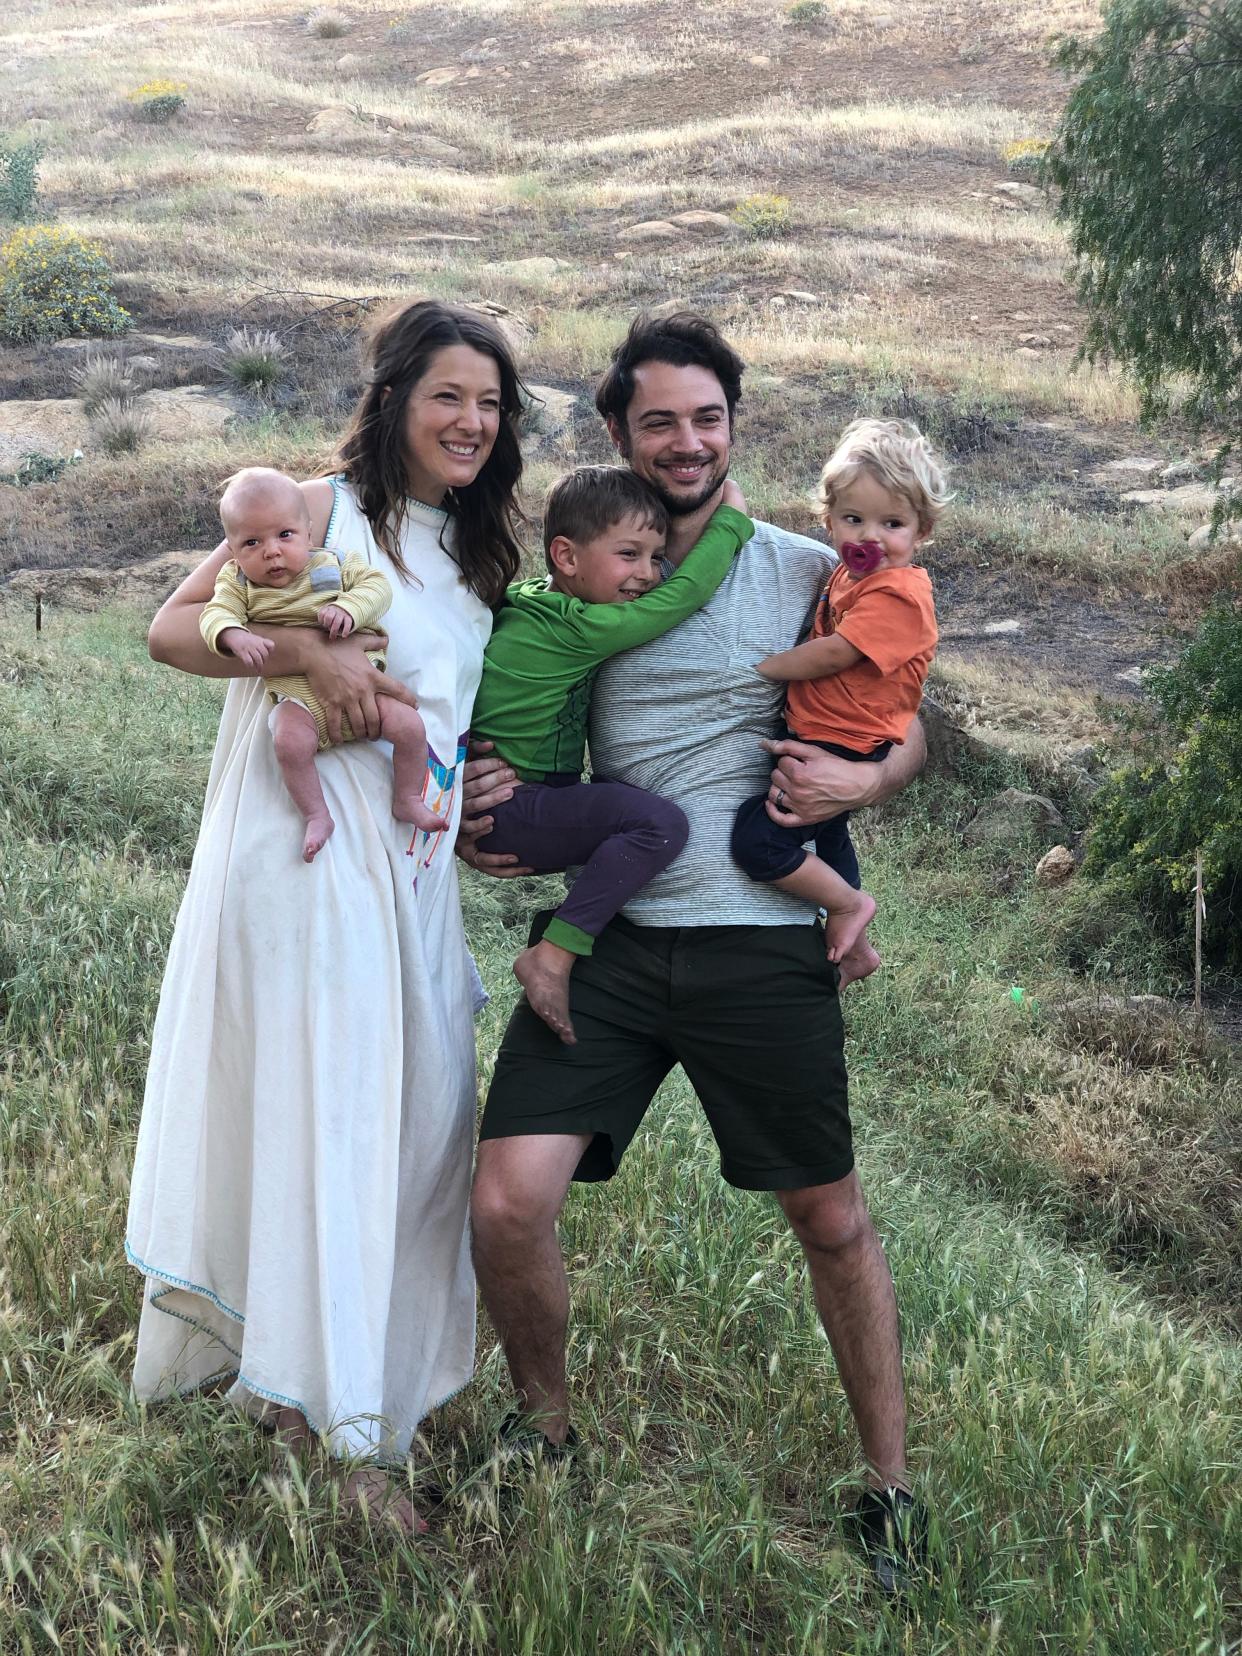 Sarah and Brandon Gullotti and their three kids near their home in Riverside, Calif. The couple used startup Flyhomes to get into their starter home last year.